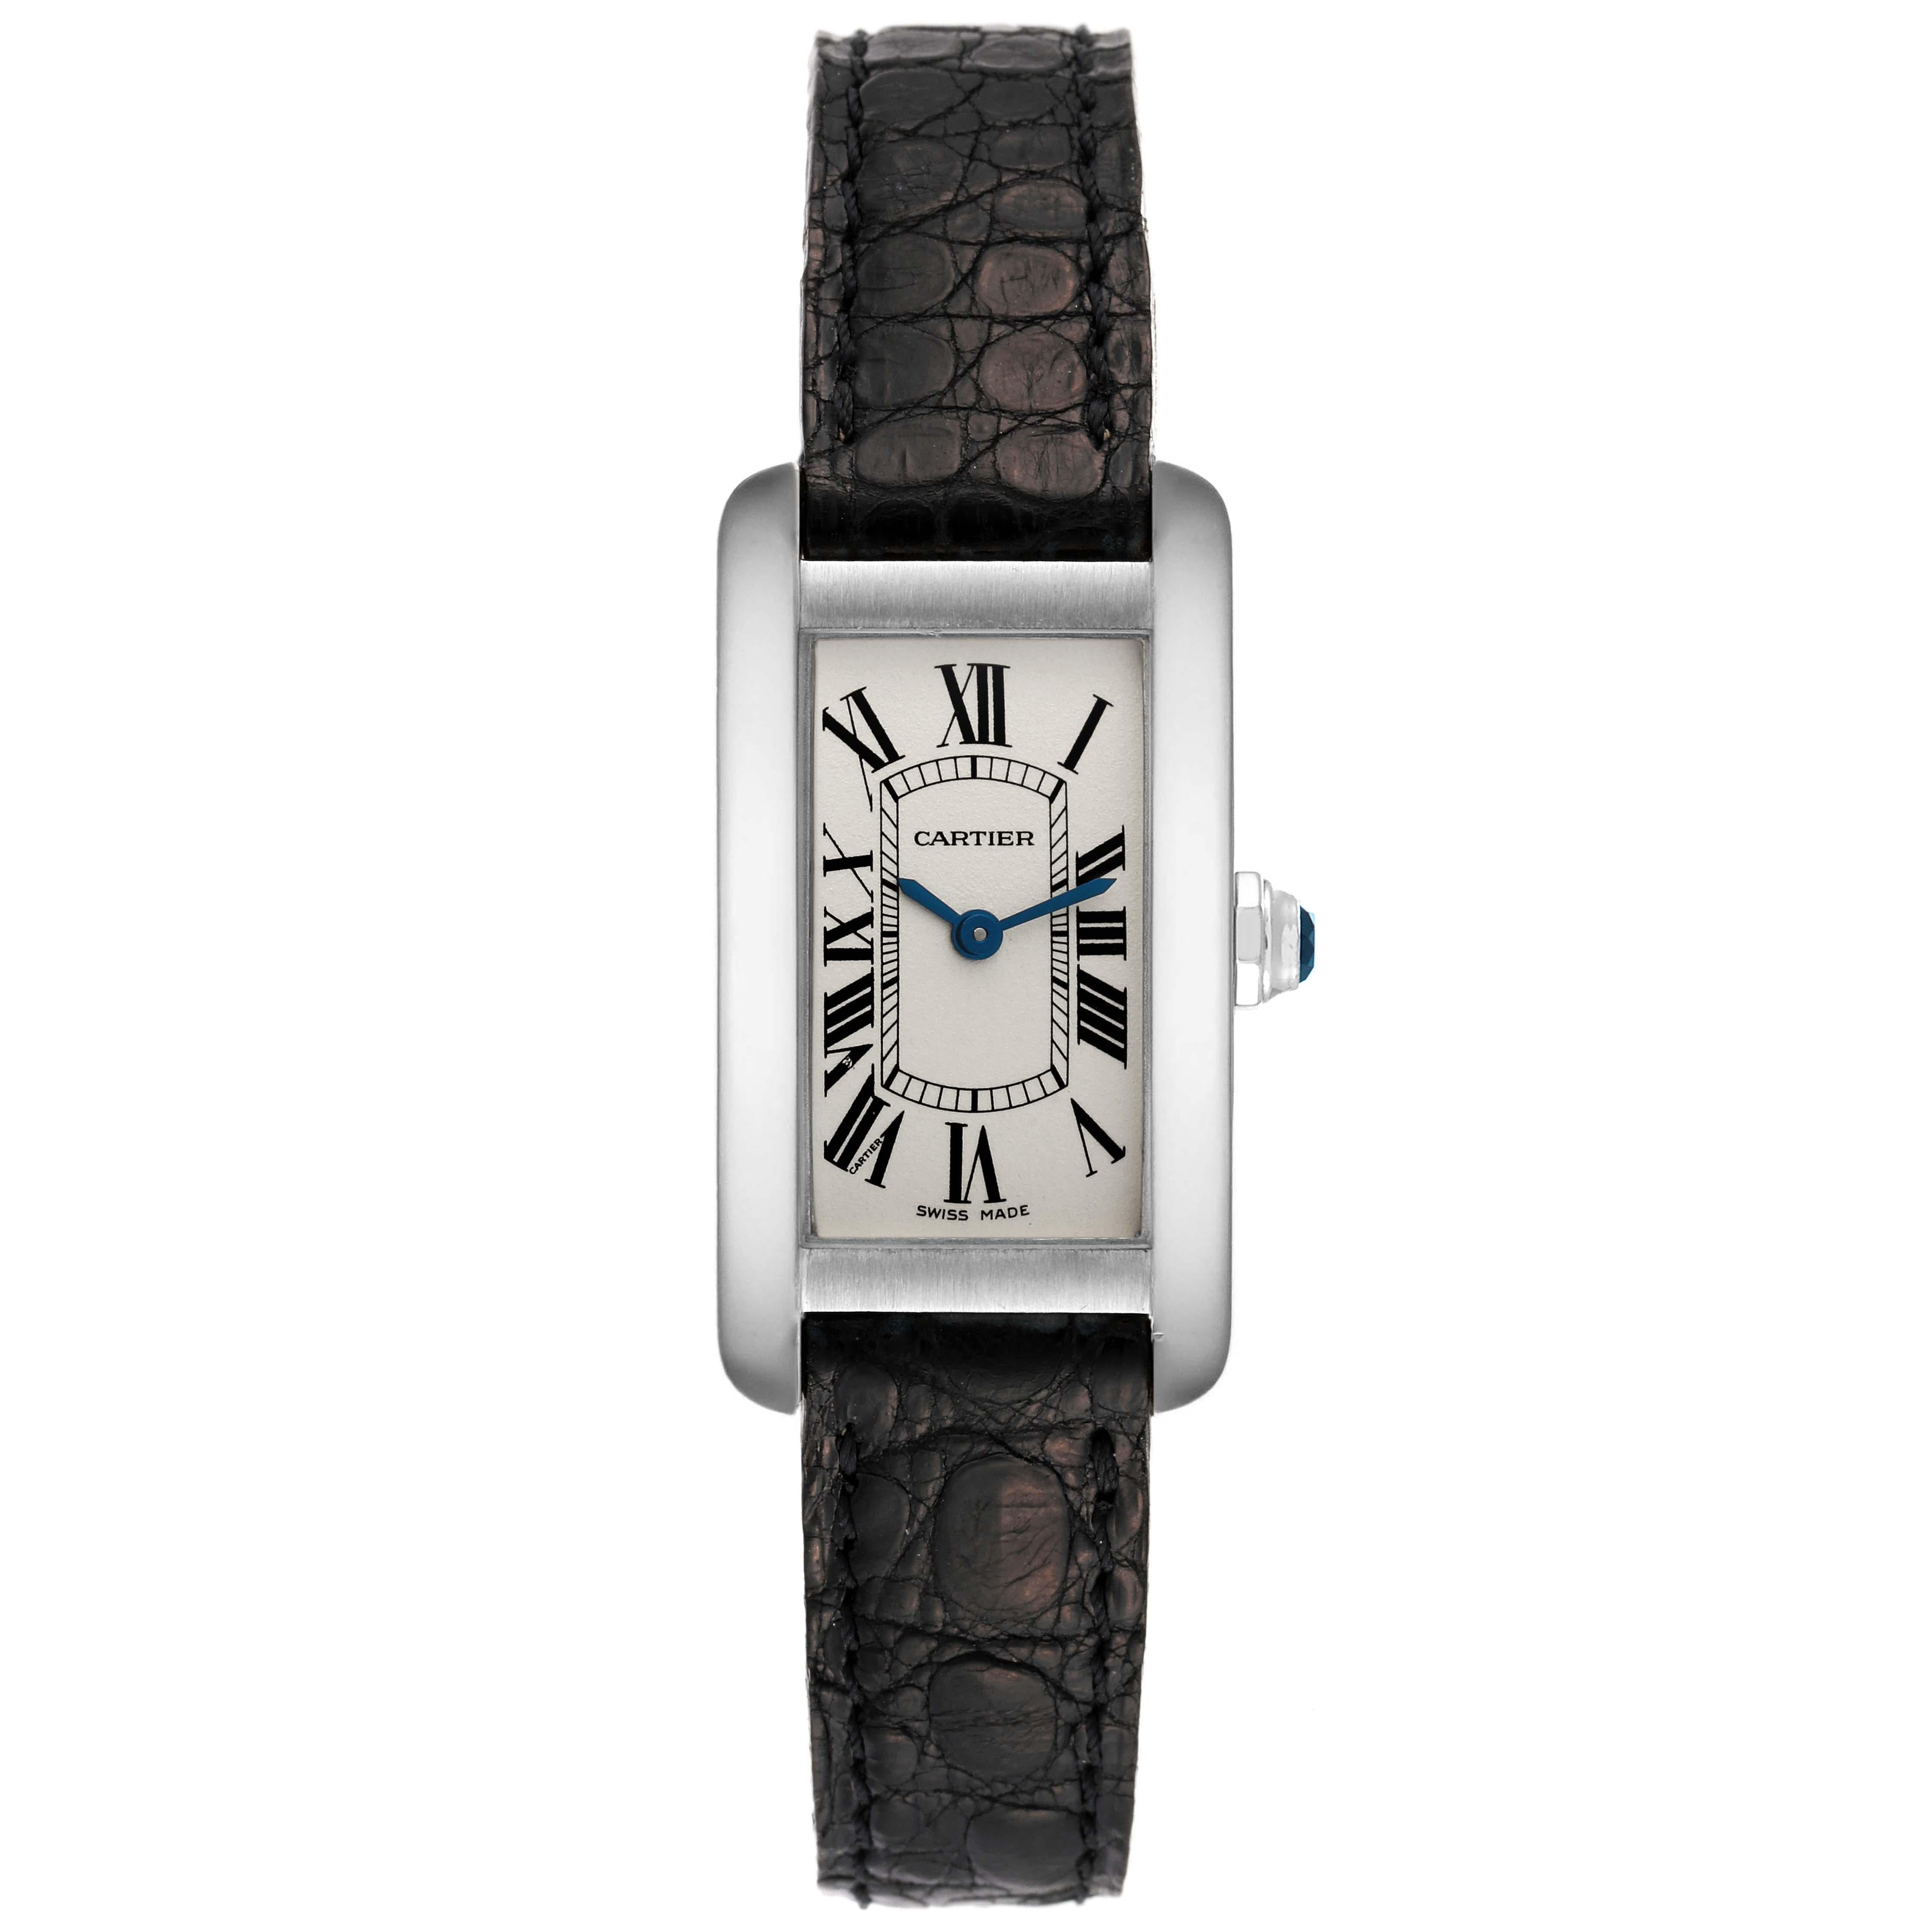 Cartier Tank Americaine White Gold Silver Dial Ladies Watch W2601956. Quartz movement. 18K white gold case 19.0 x 35.0 mm. Octagonal crown set with faceted blue sapphire. . Scratch resistant sapphire crystal. Silvered grained dial with black Roman